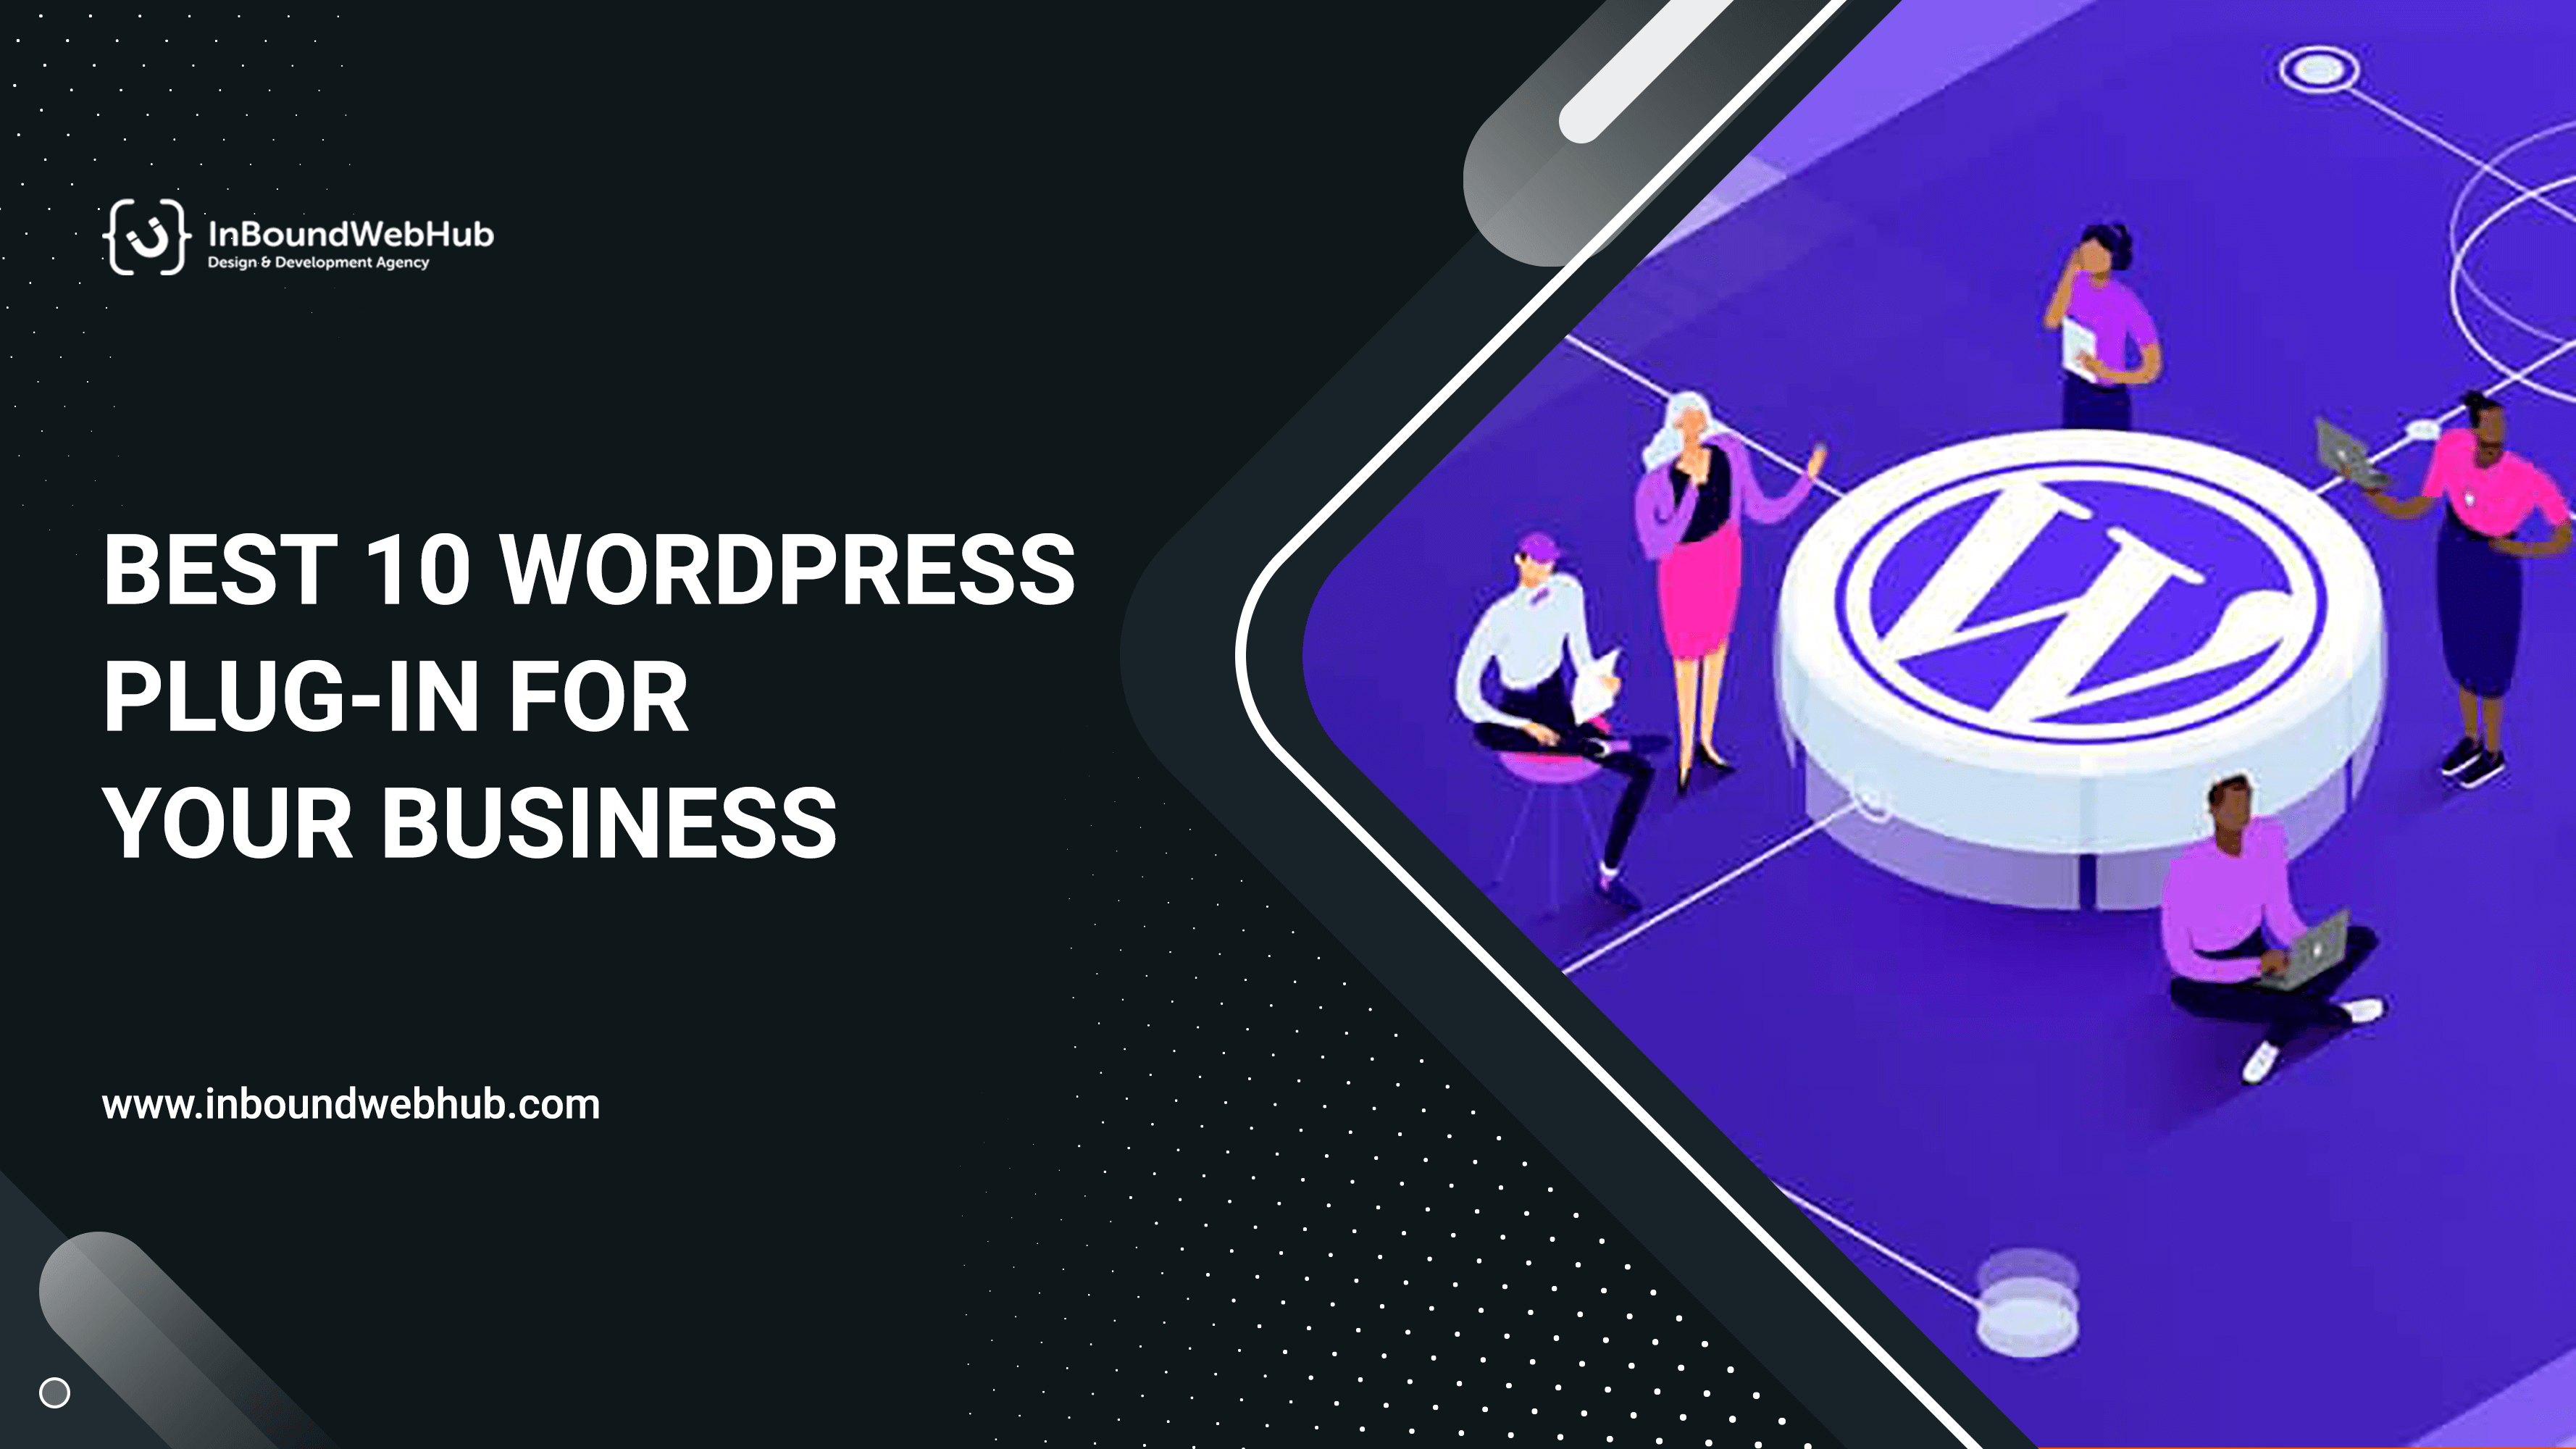 Best 10 WordPress plug-in for your business